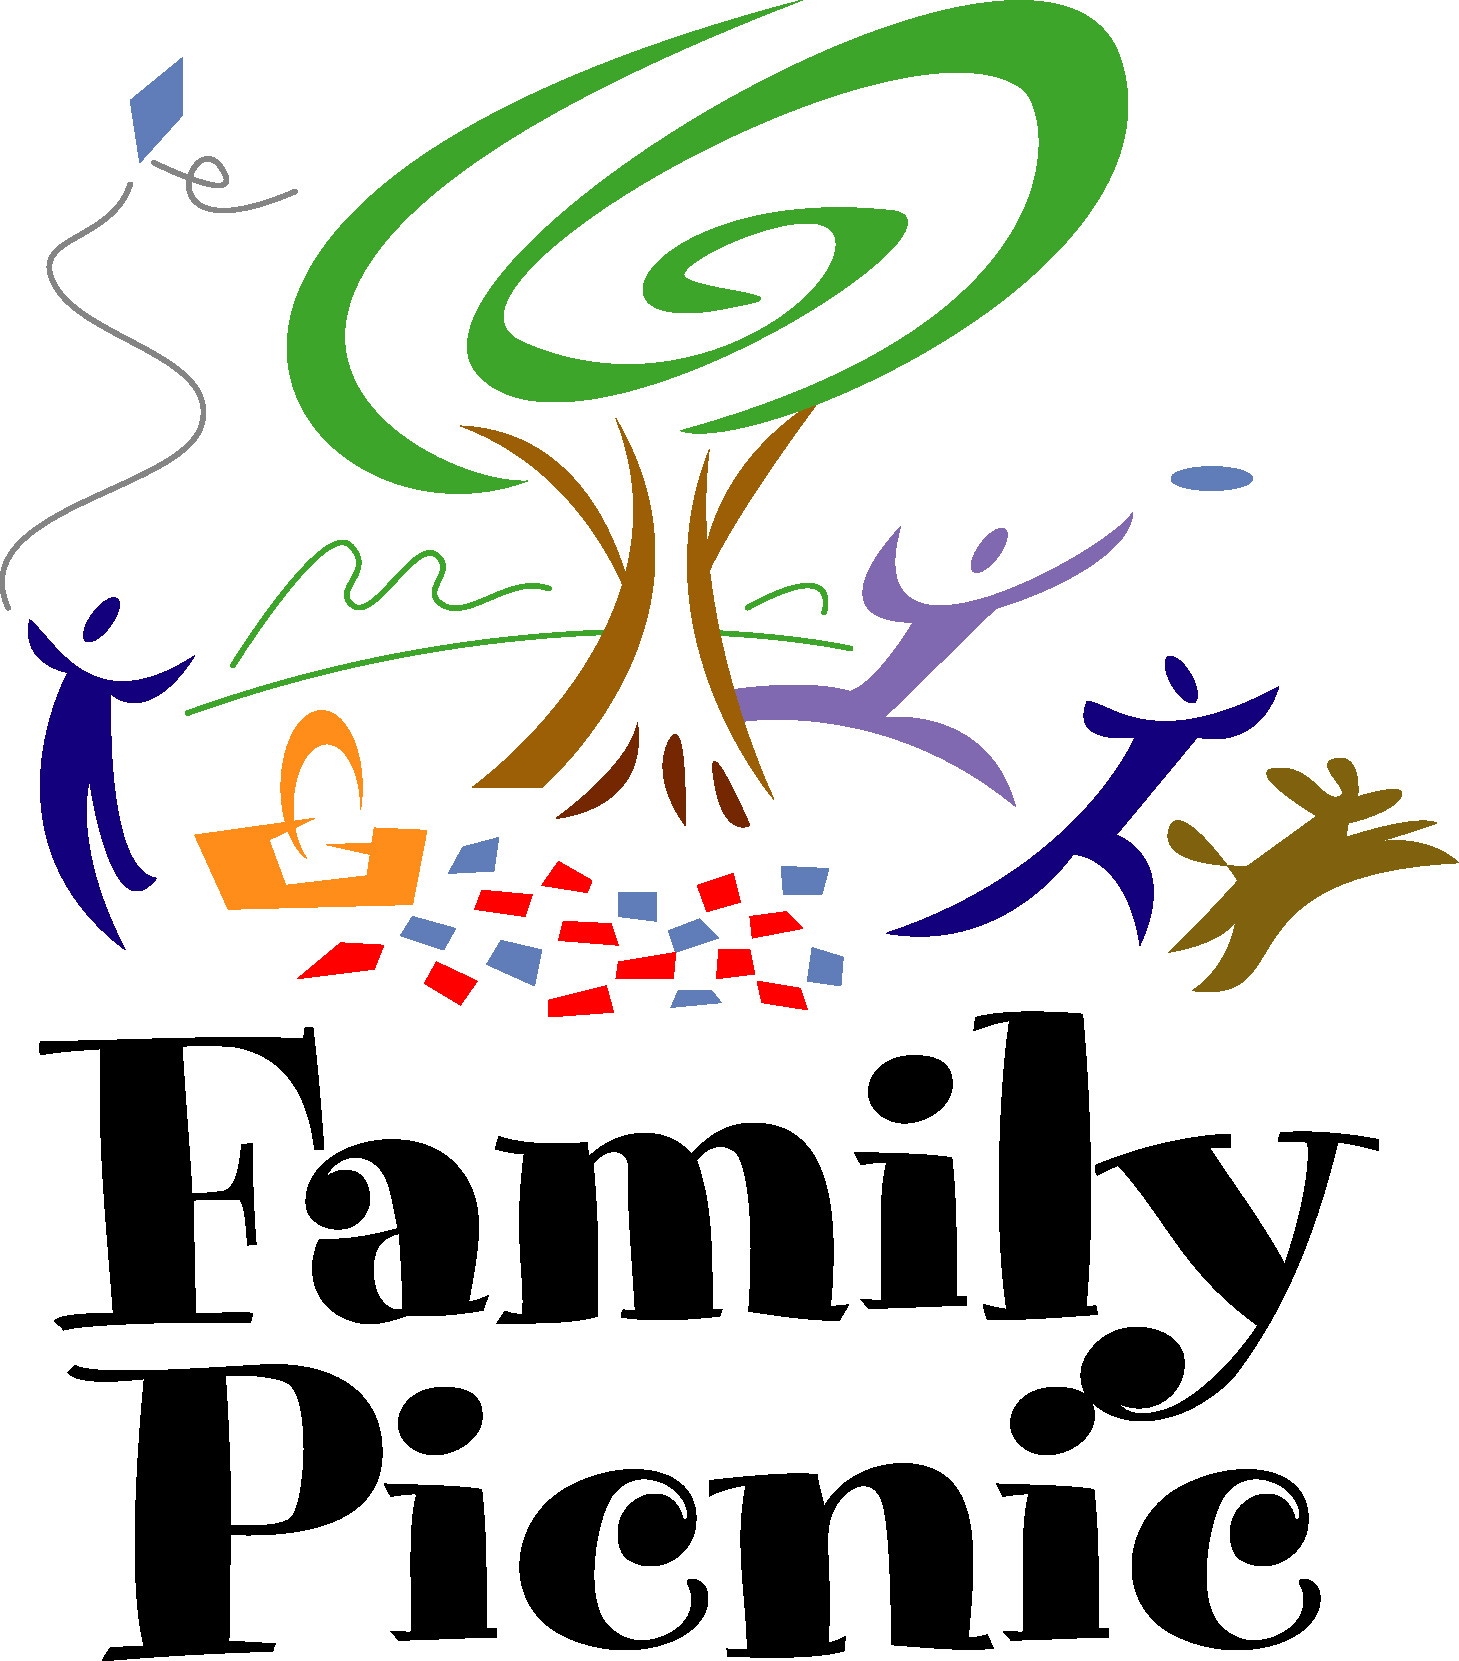 Clip Arts Related To : church picnic clipart. 